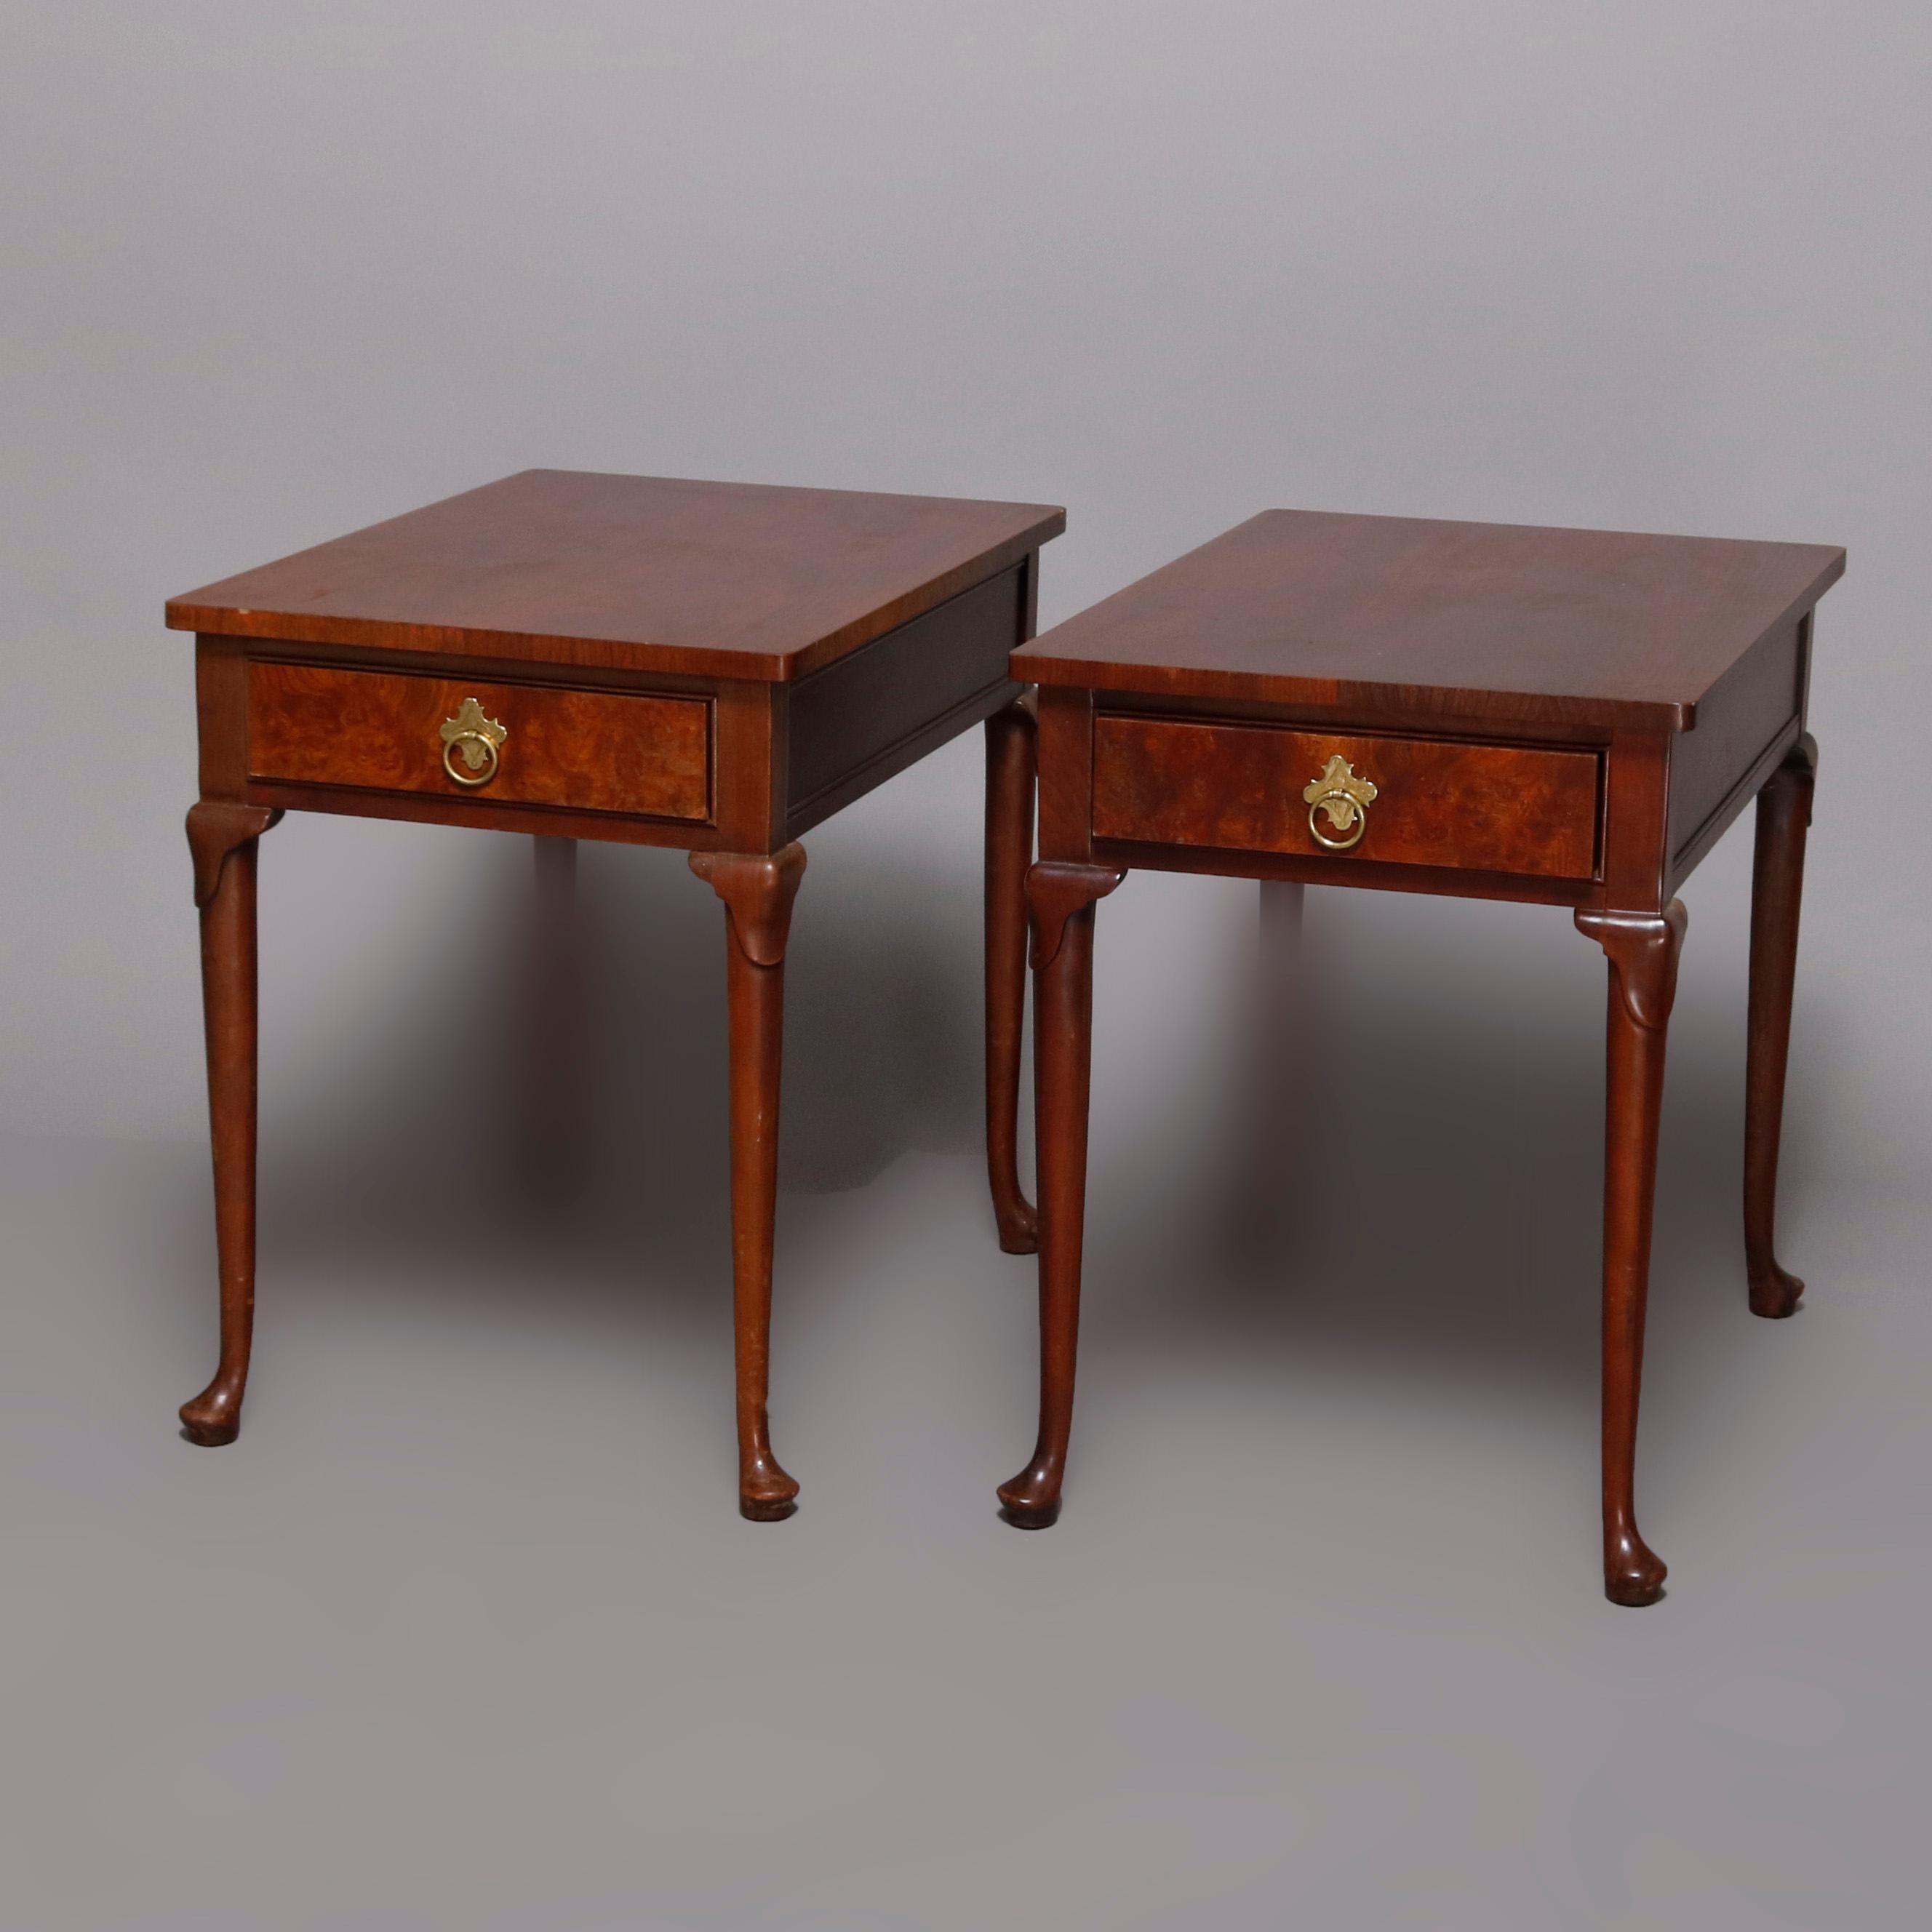 A pair of end stands by Baker Furniture Co. offer mahogany construction each with single burl drawer having brass pulls and raised on cabriole legs terminating in pad feet, Baker label on drawer interior as photographed, 20th century.

Measures: